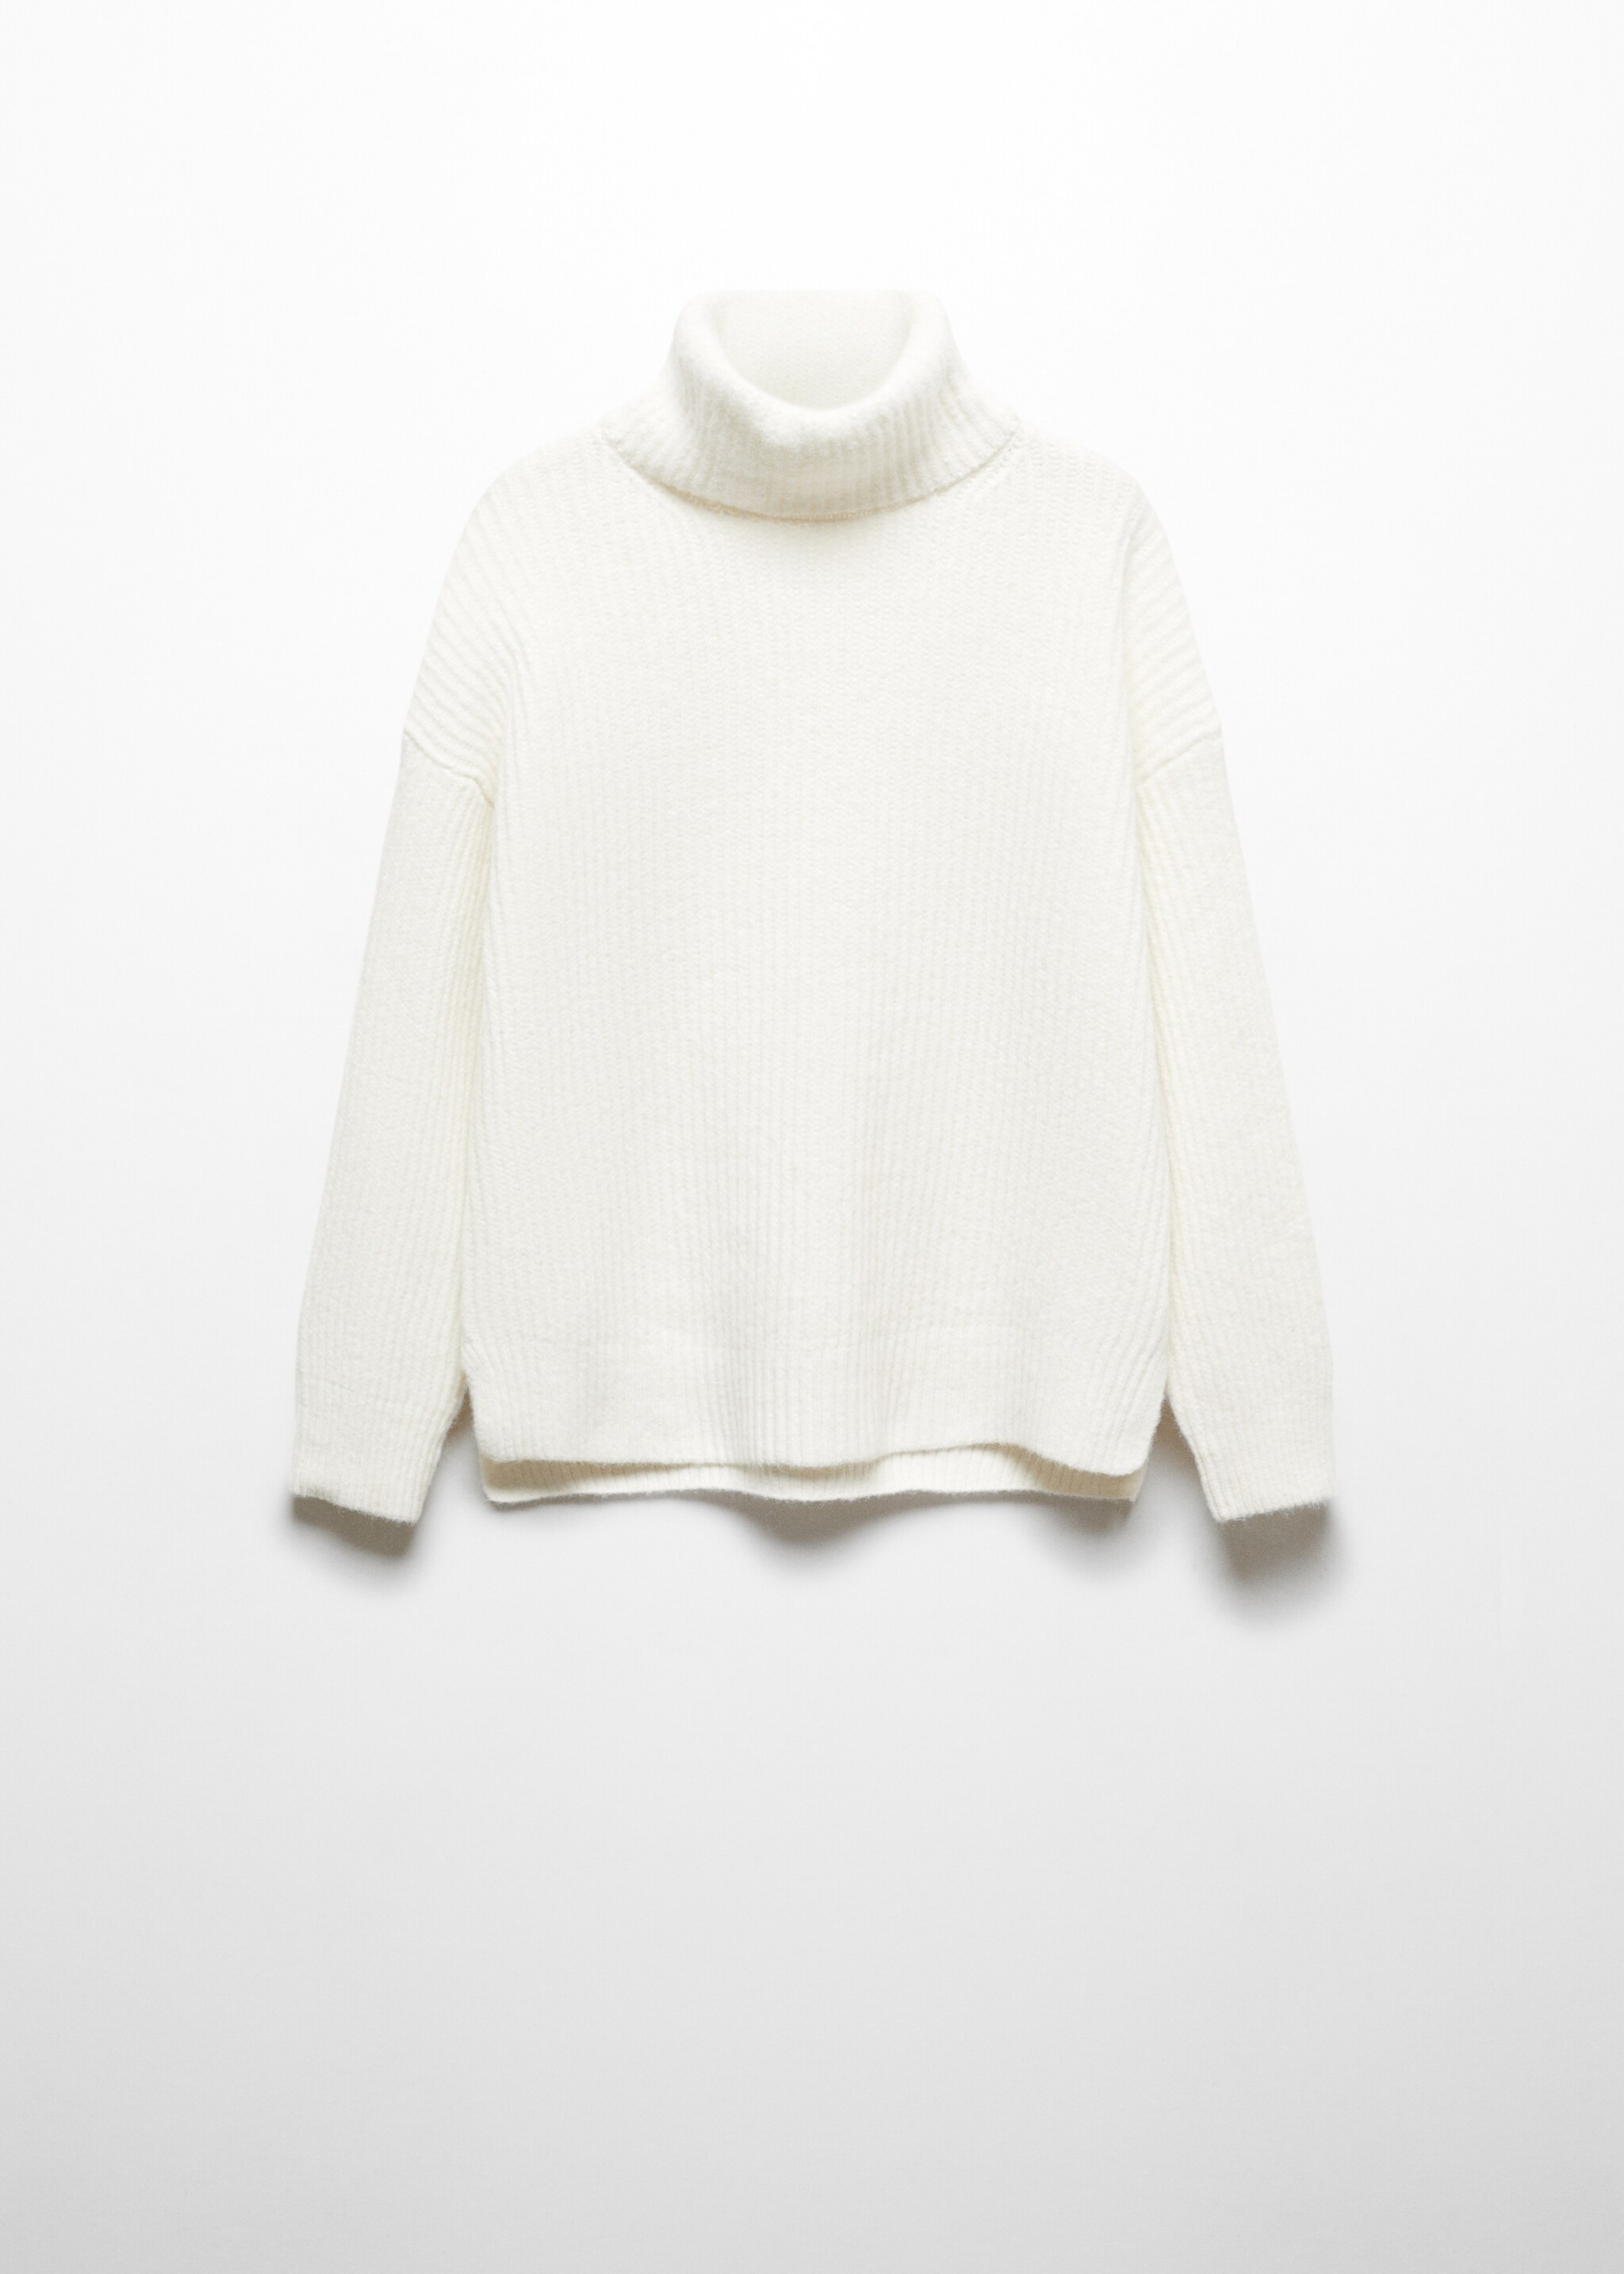 Rolled neck cable sweater - Article without model